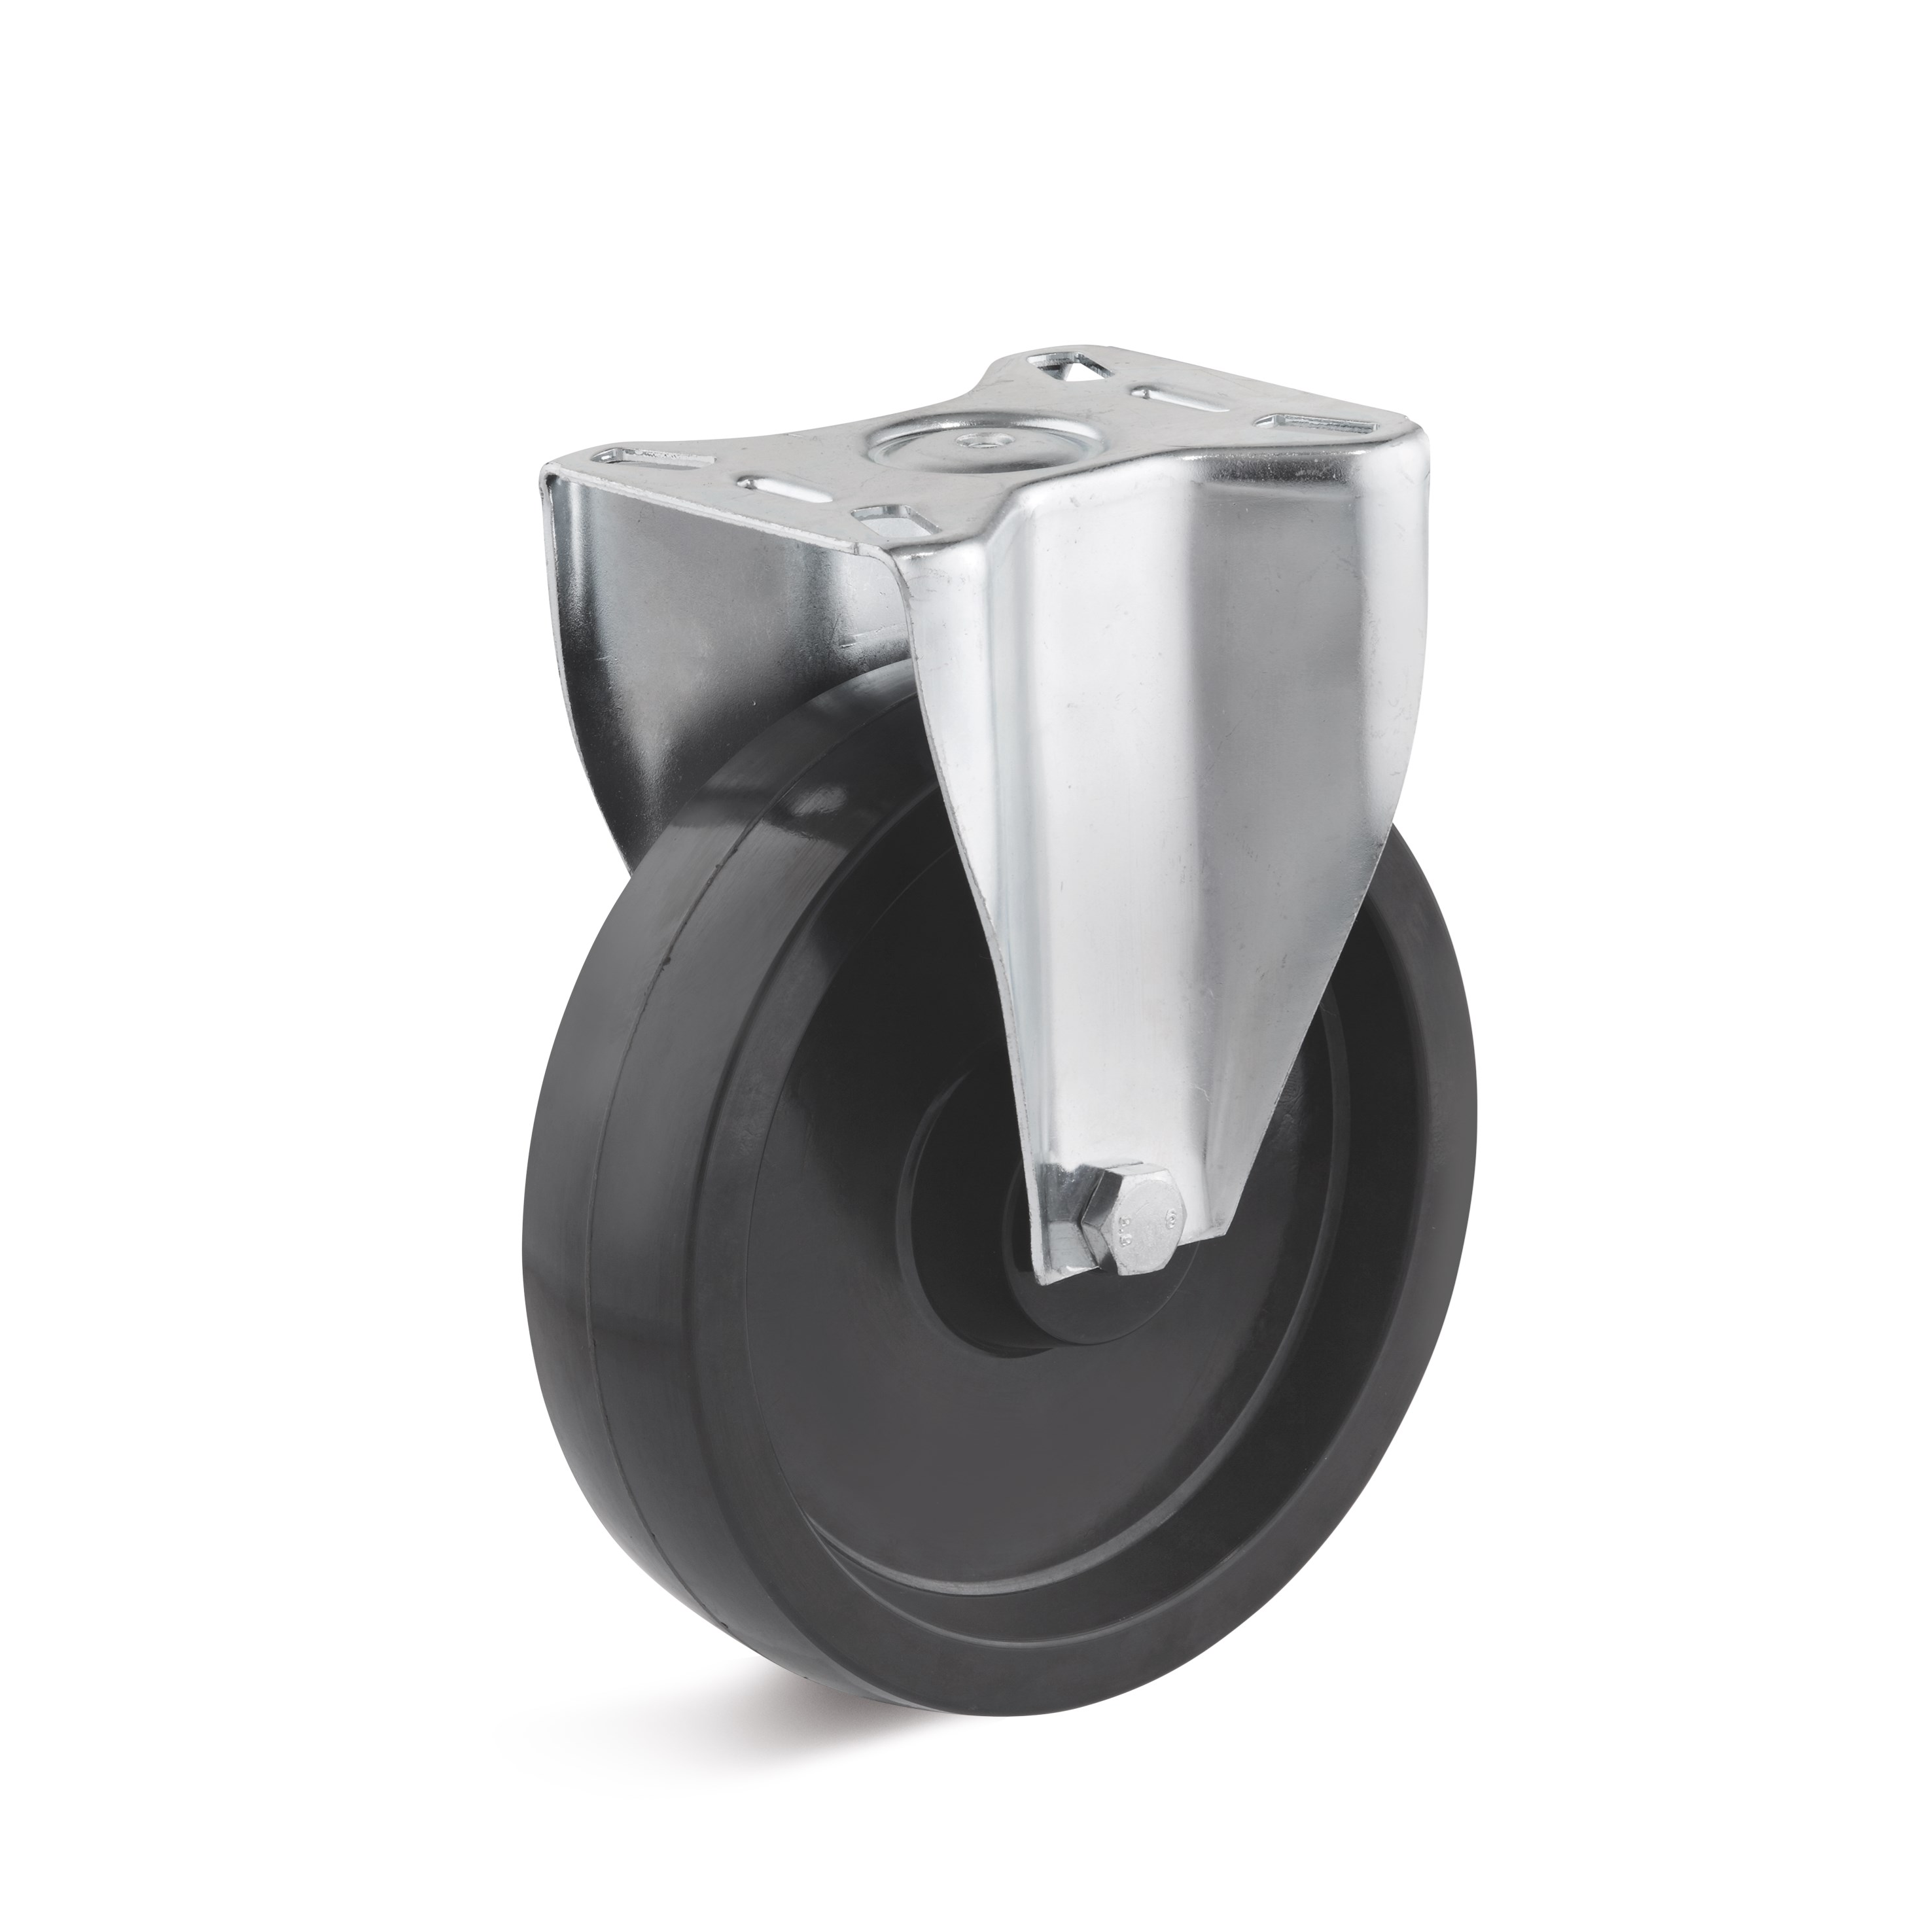 Fixed caster with heat-resistant plastic wheel